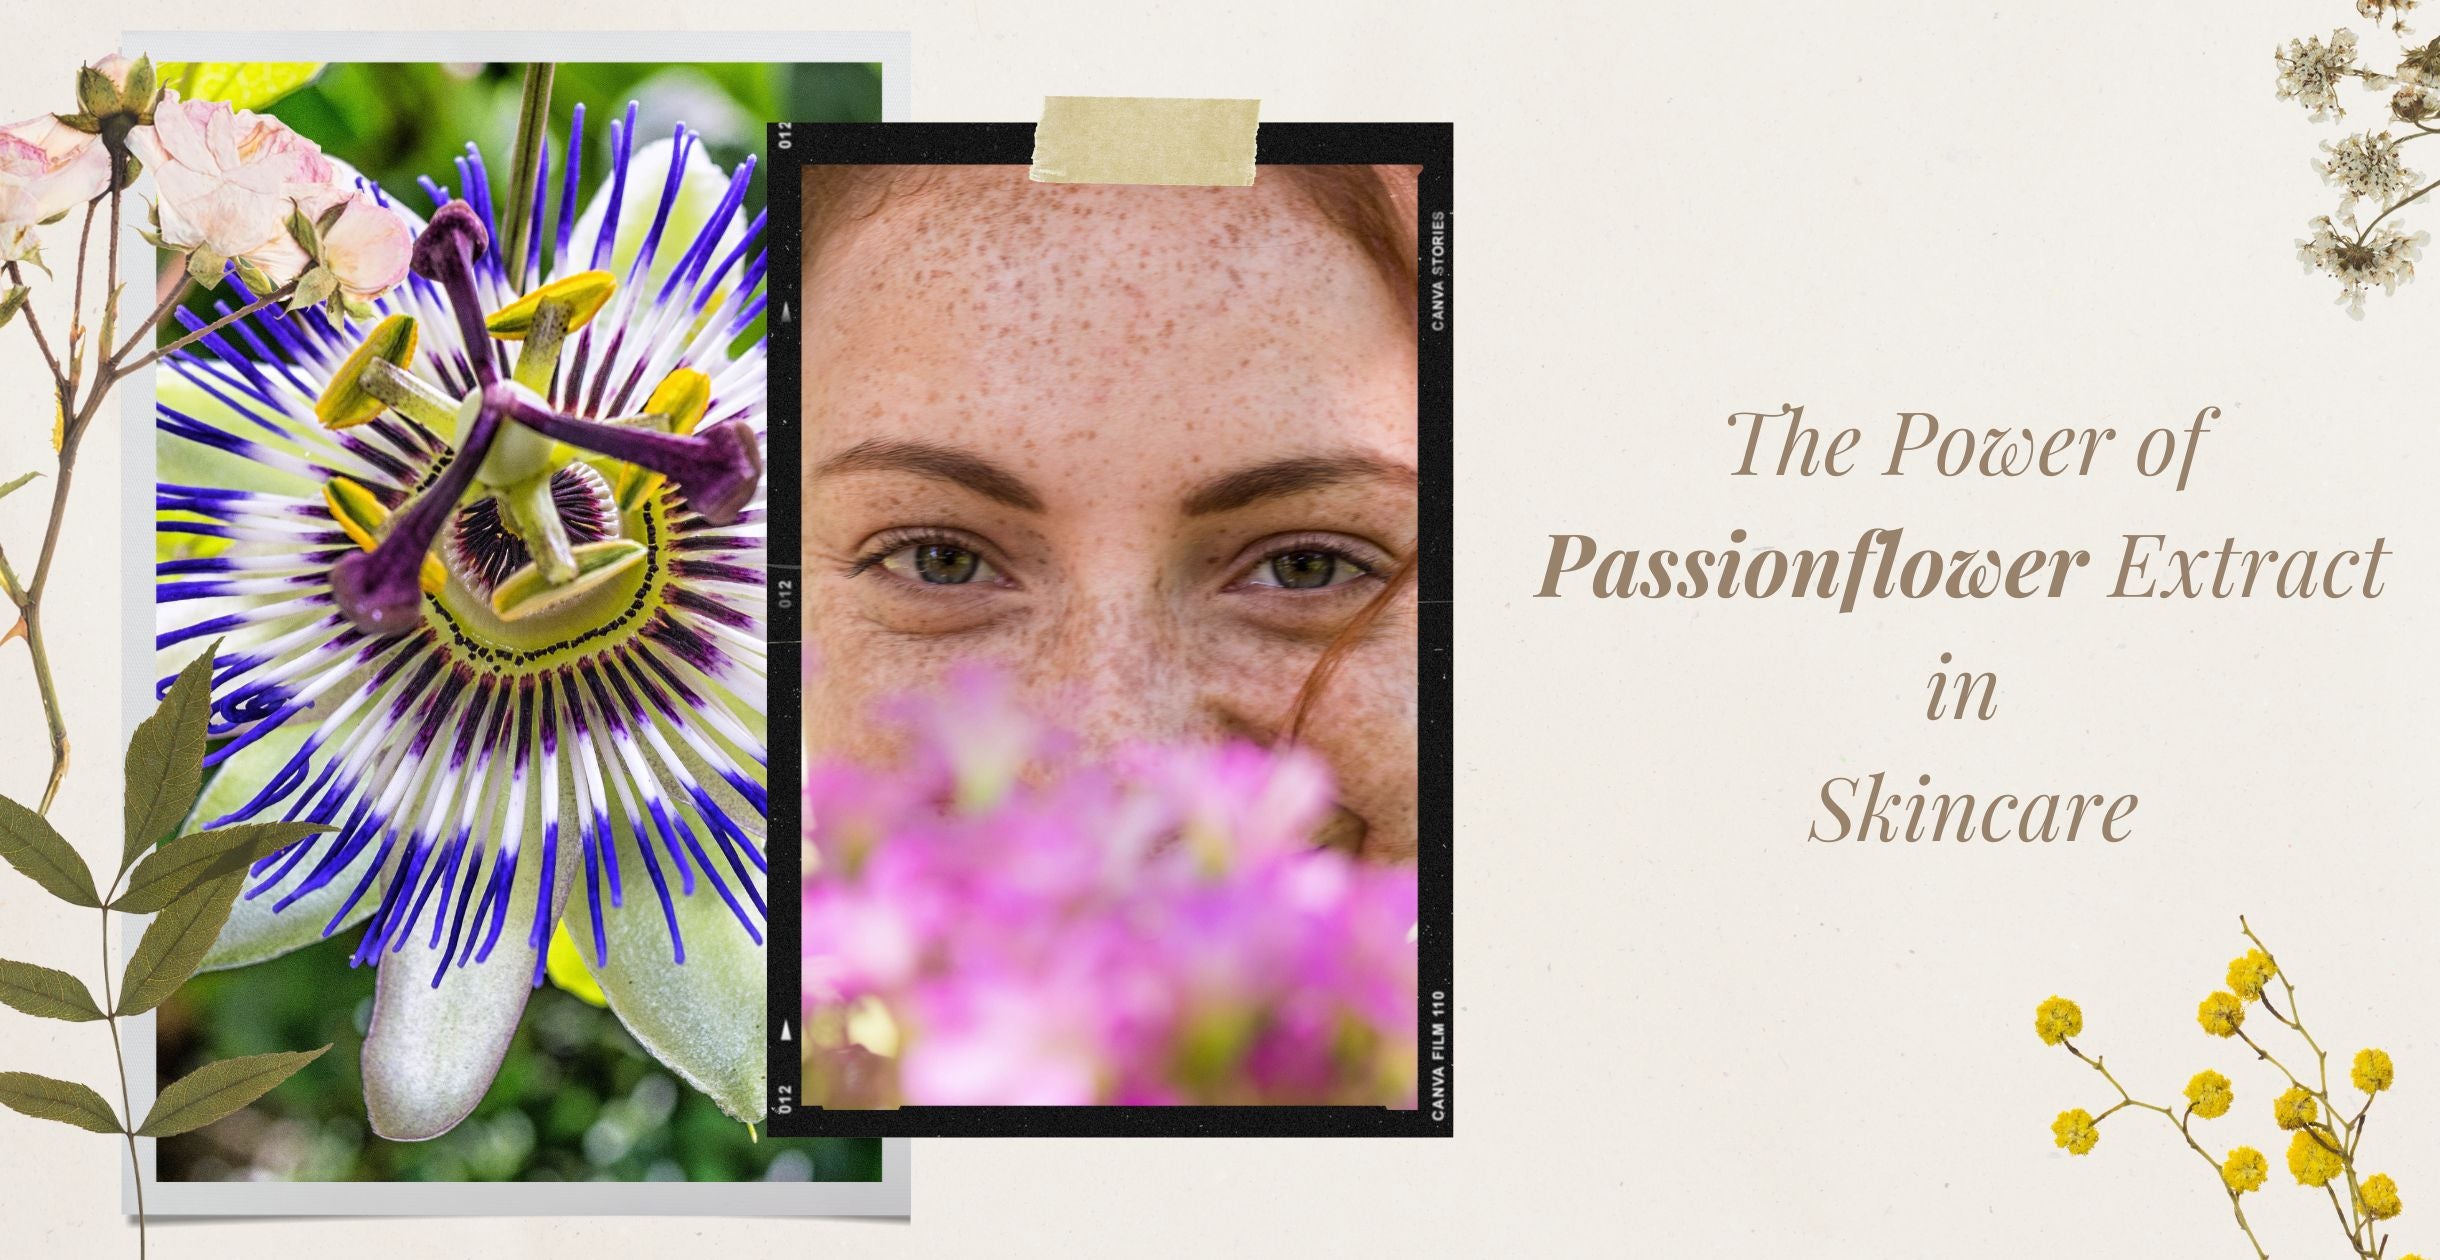 The Power of Passionflower Extract in Skincare